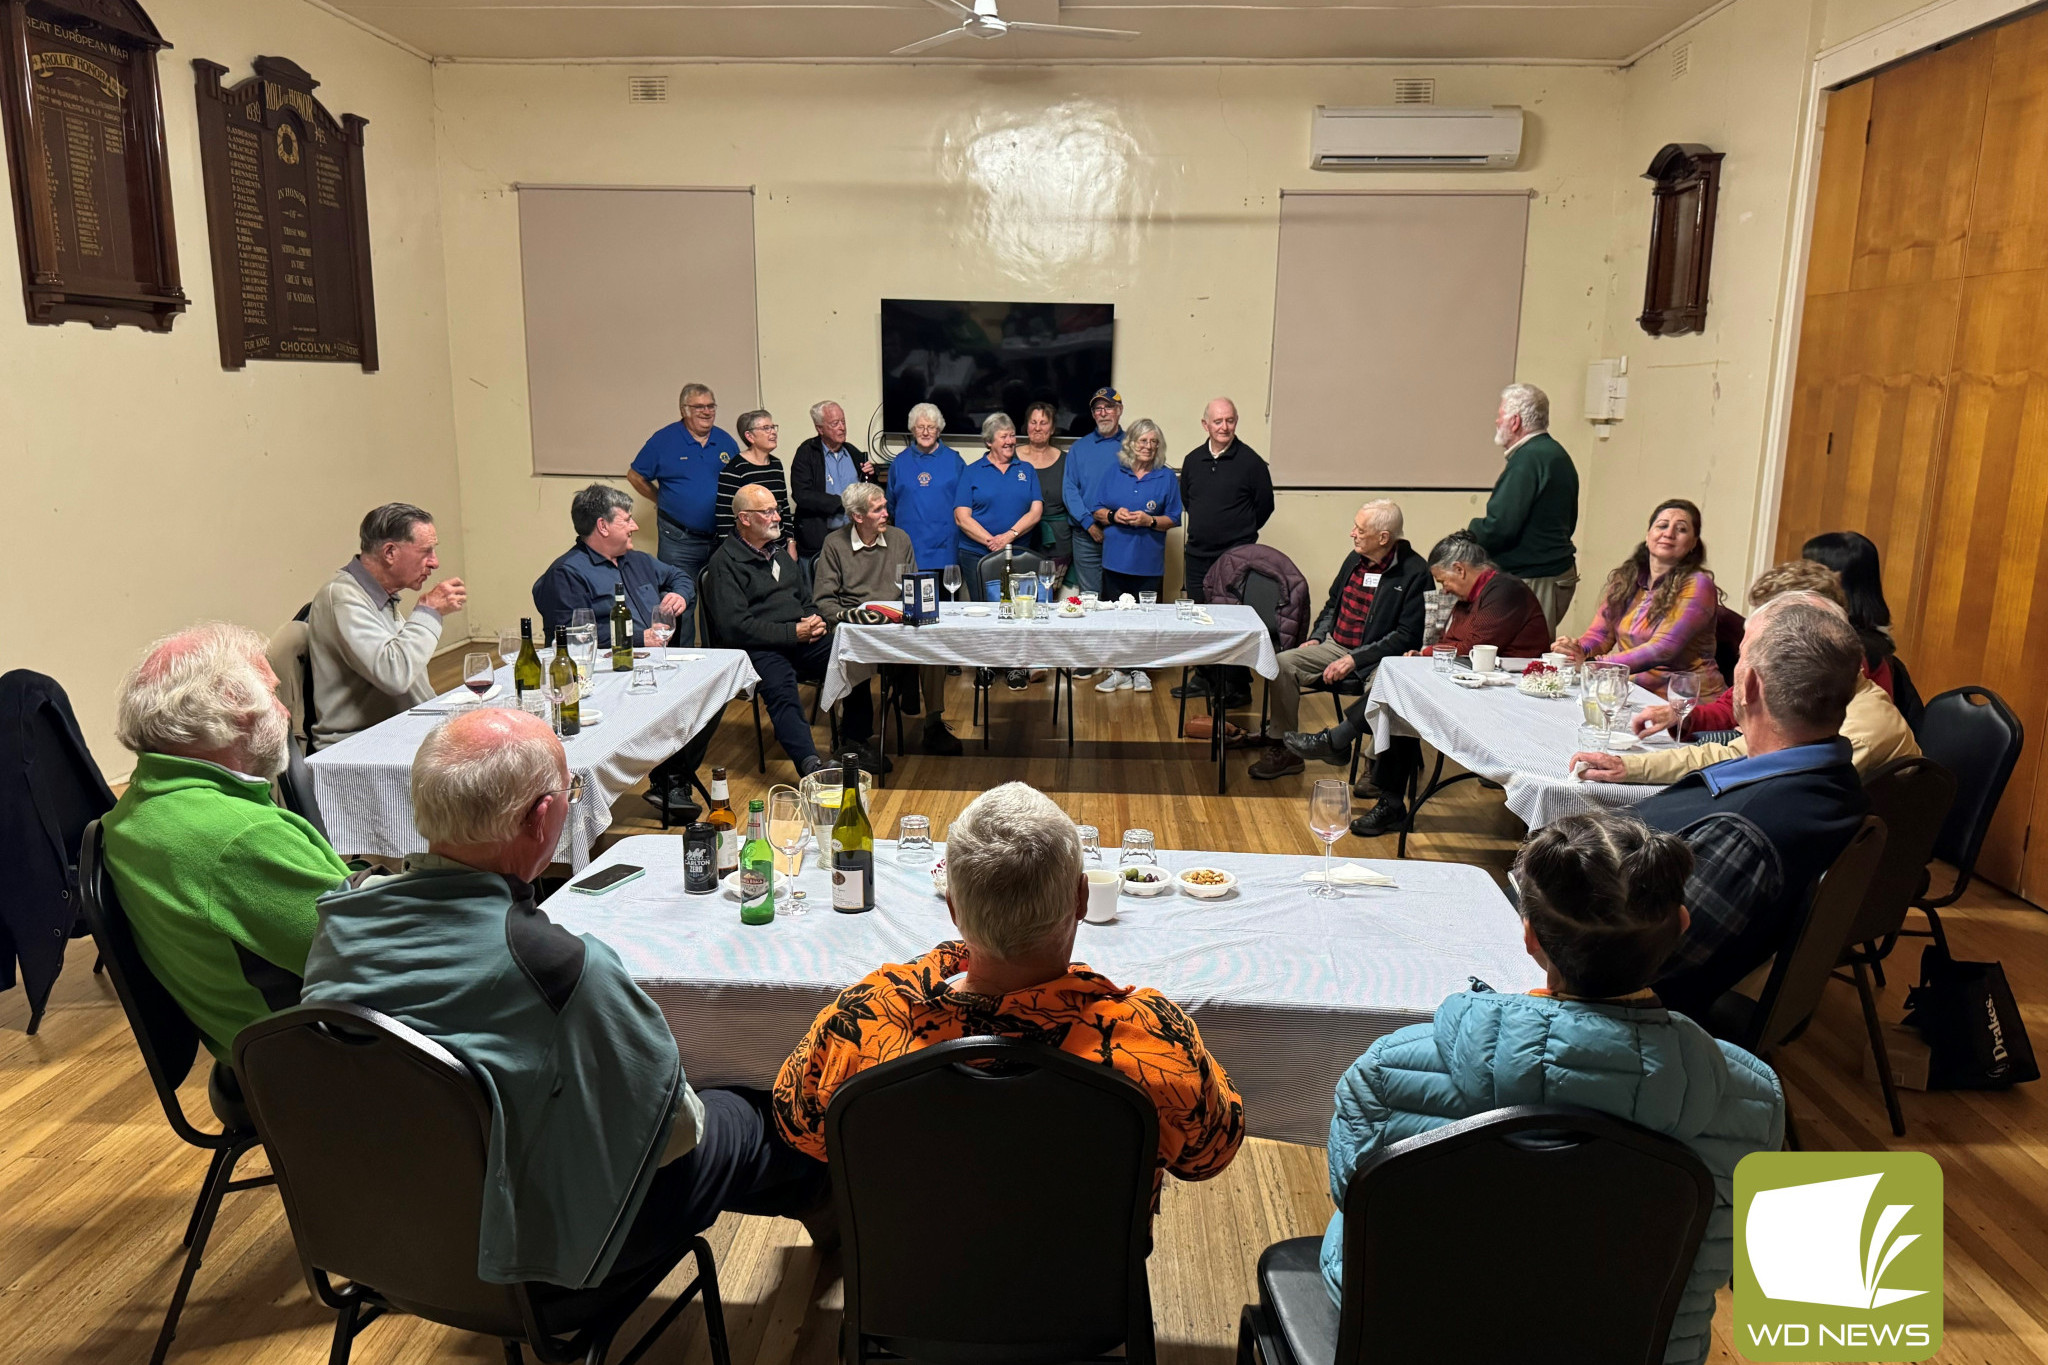 Visit enjoyed: The Field Geologists Club of South Australia paid a visit to the region recently and thanked the Lions Club of Camperdown for catering for one of their meals.